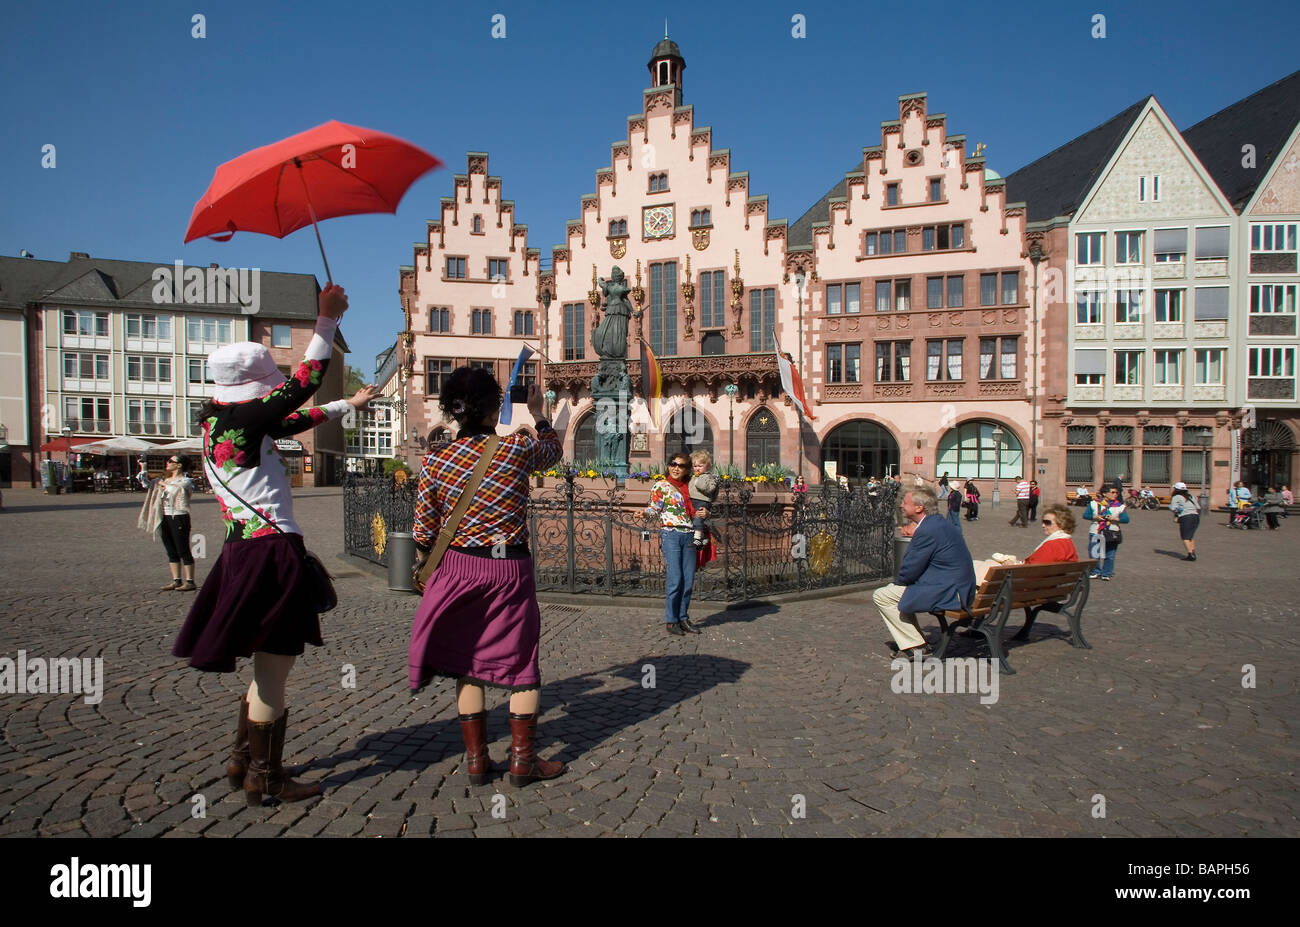 Roemerberg in the old town with historical buildings and a statue of Justitia (Justice): Japanese tourists taking photos Stock Photo